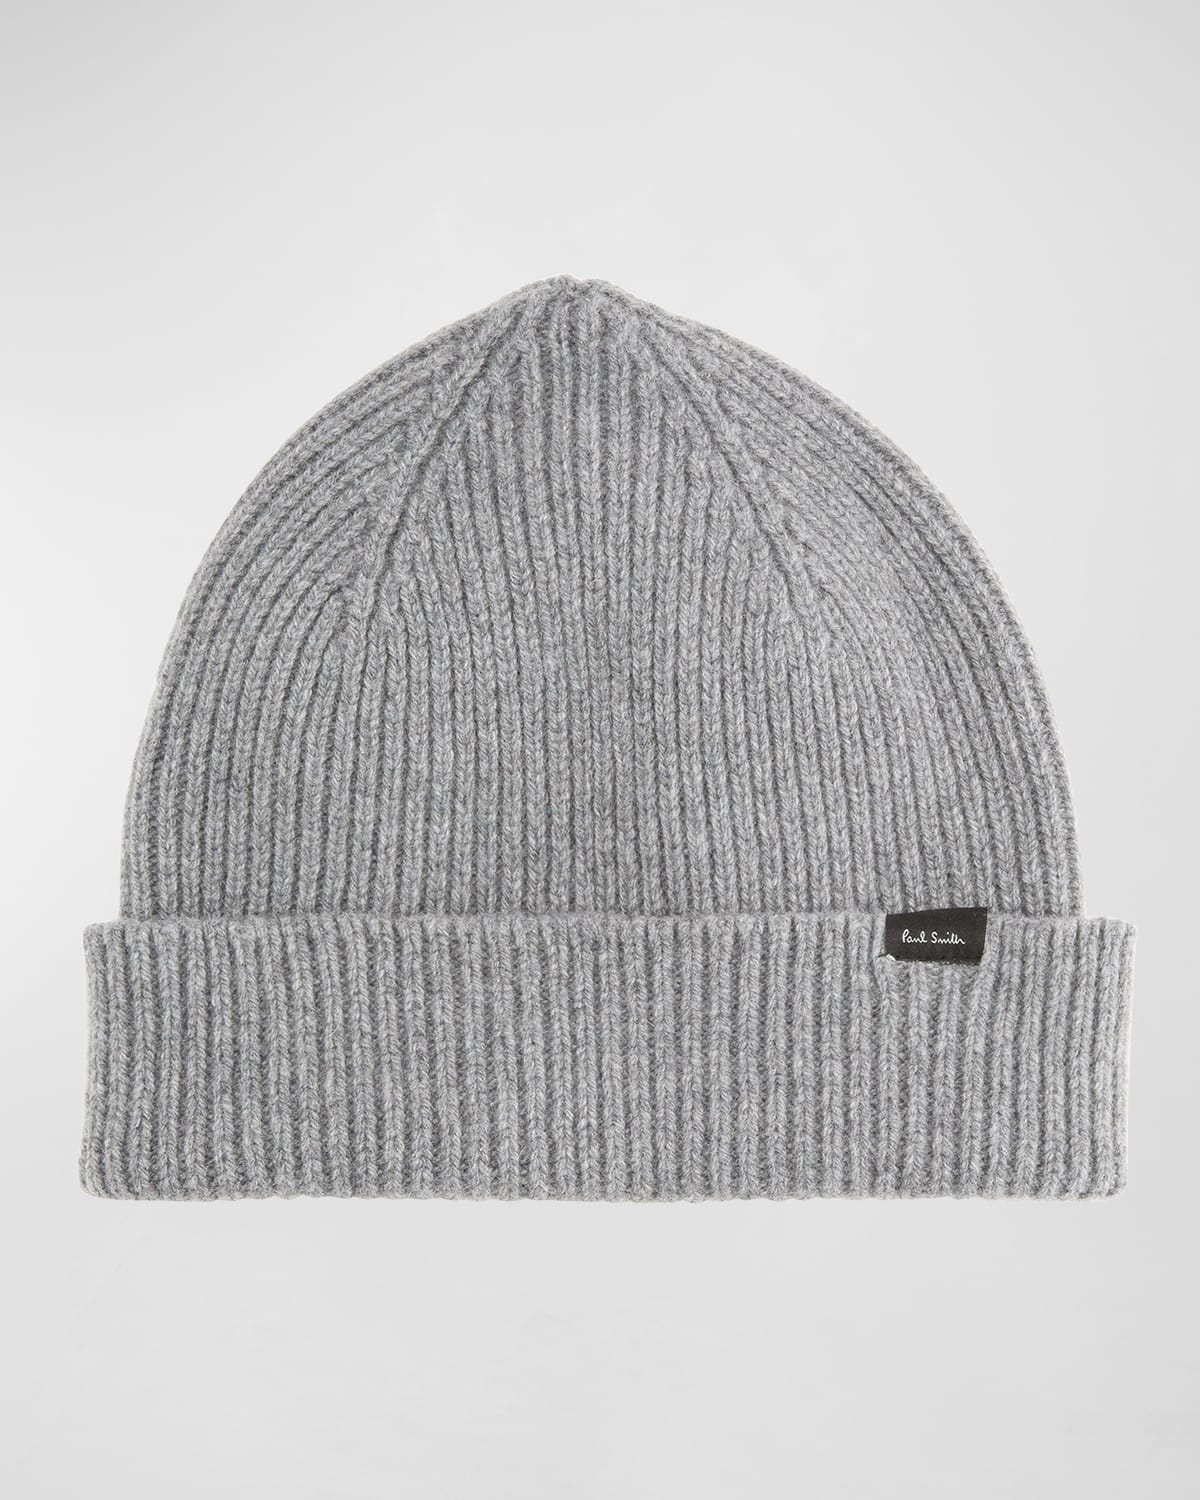 PAUL SMITH MEN'S RIBBED CASHMERE-WOOL BEANIE HAT